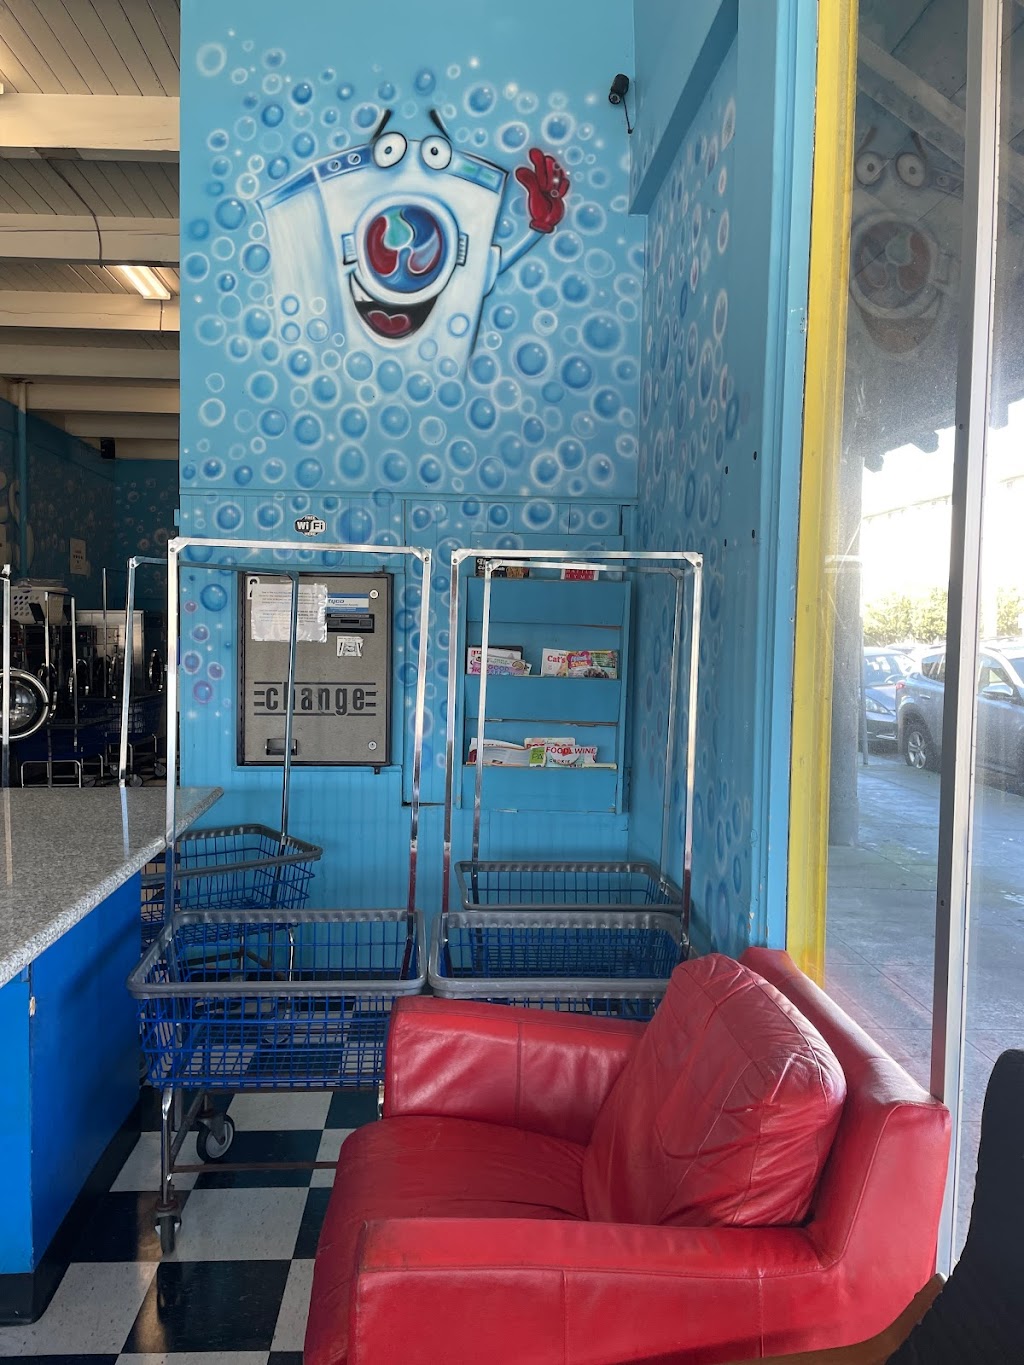 Tons of Bubbles Laundromat | 440 Manor Plaza, Pacifica, CA 94044 | Phone: (925) 822-7882